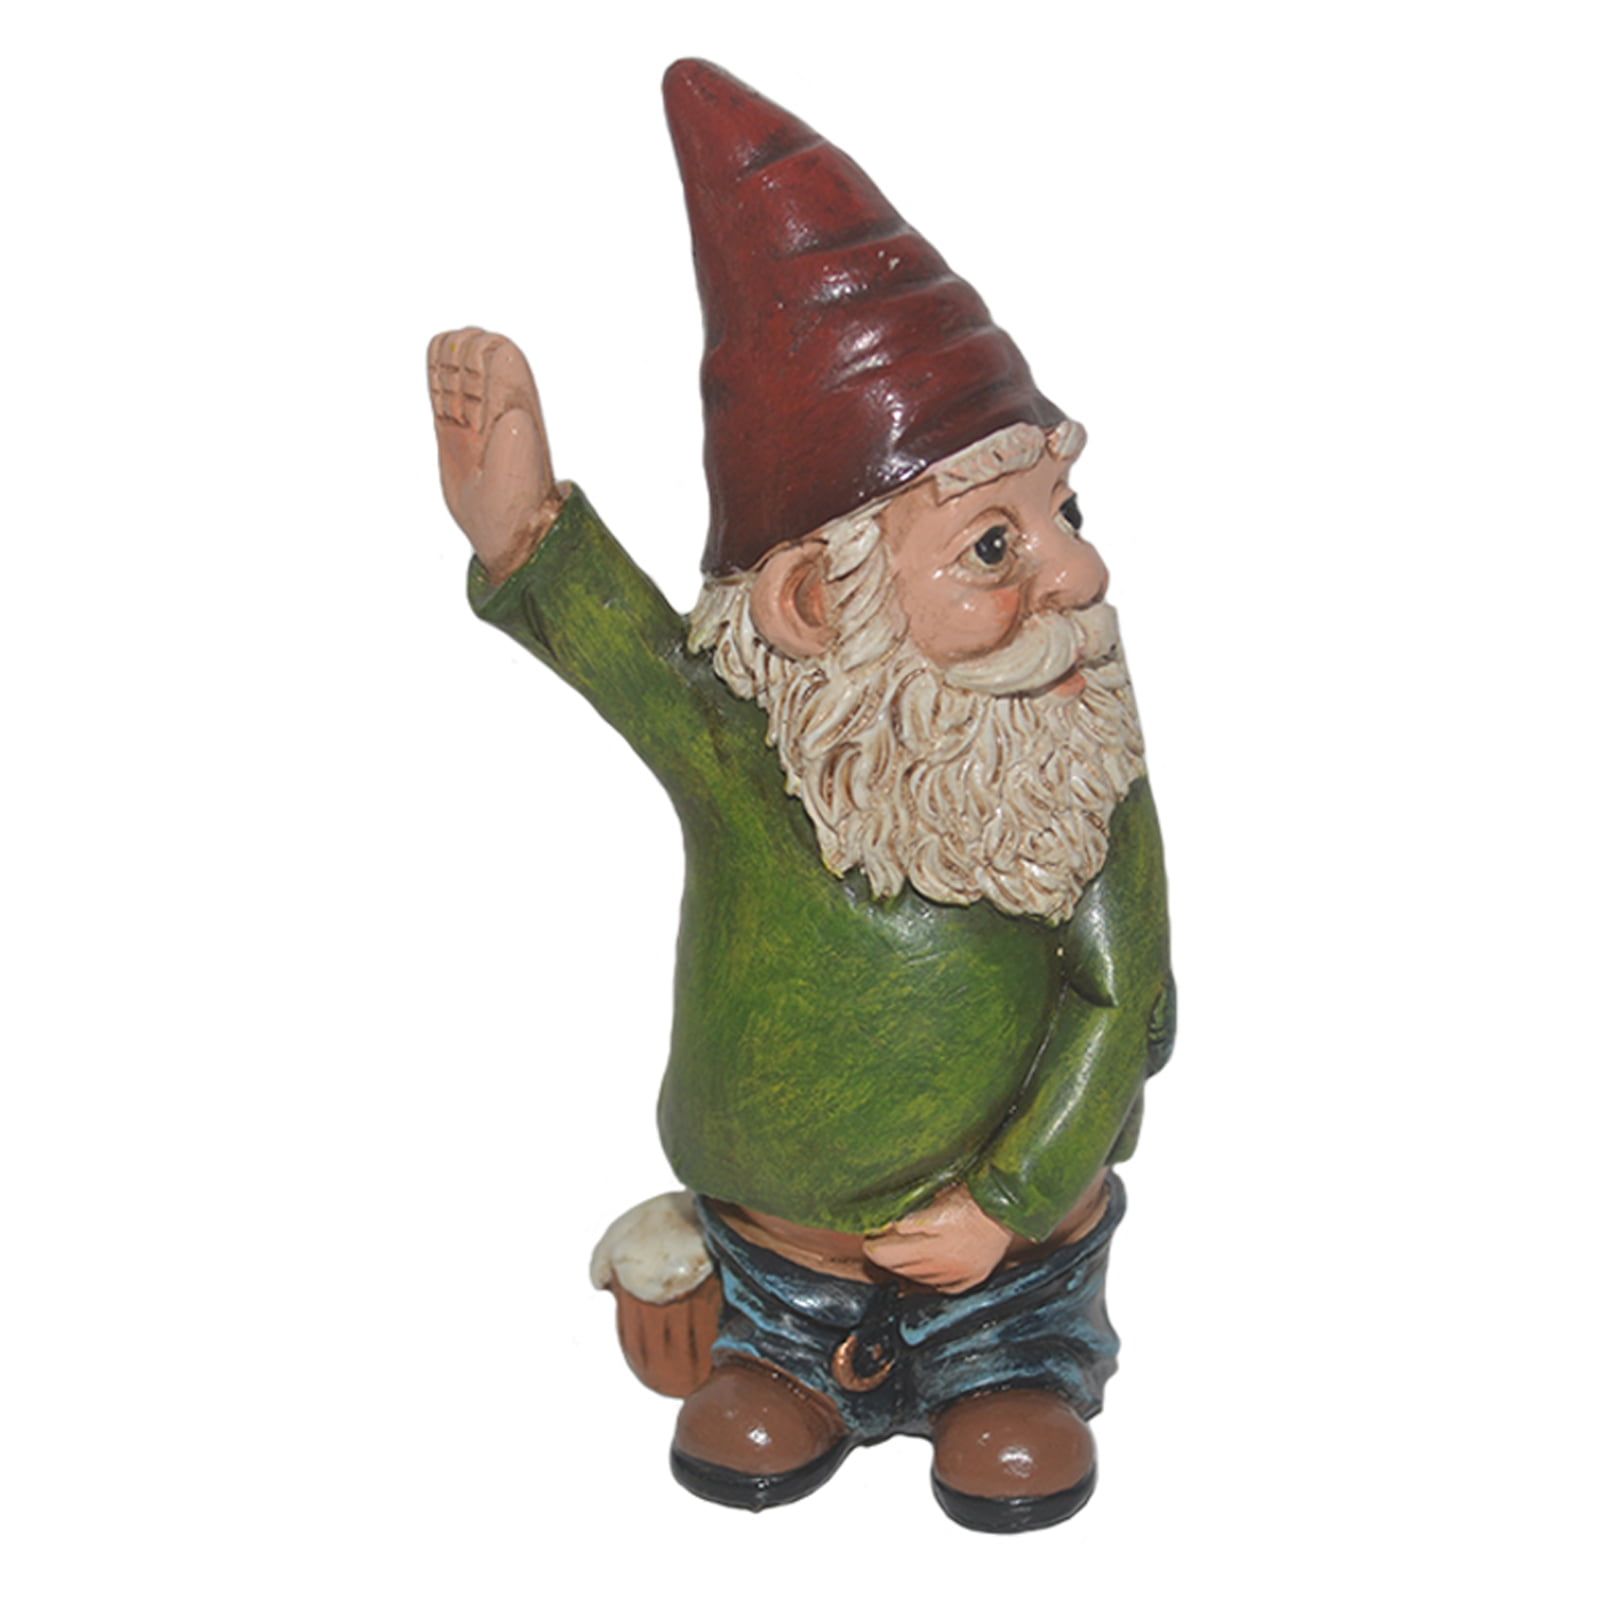 Funny Gnome Ornament Figurines Naughty Peeing Garden Yard Art Decoration Statue